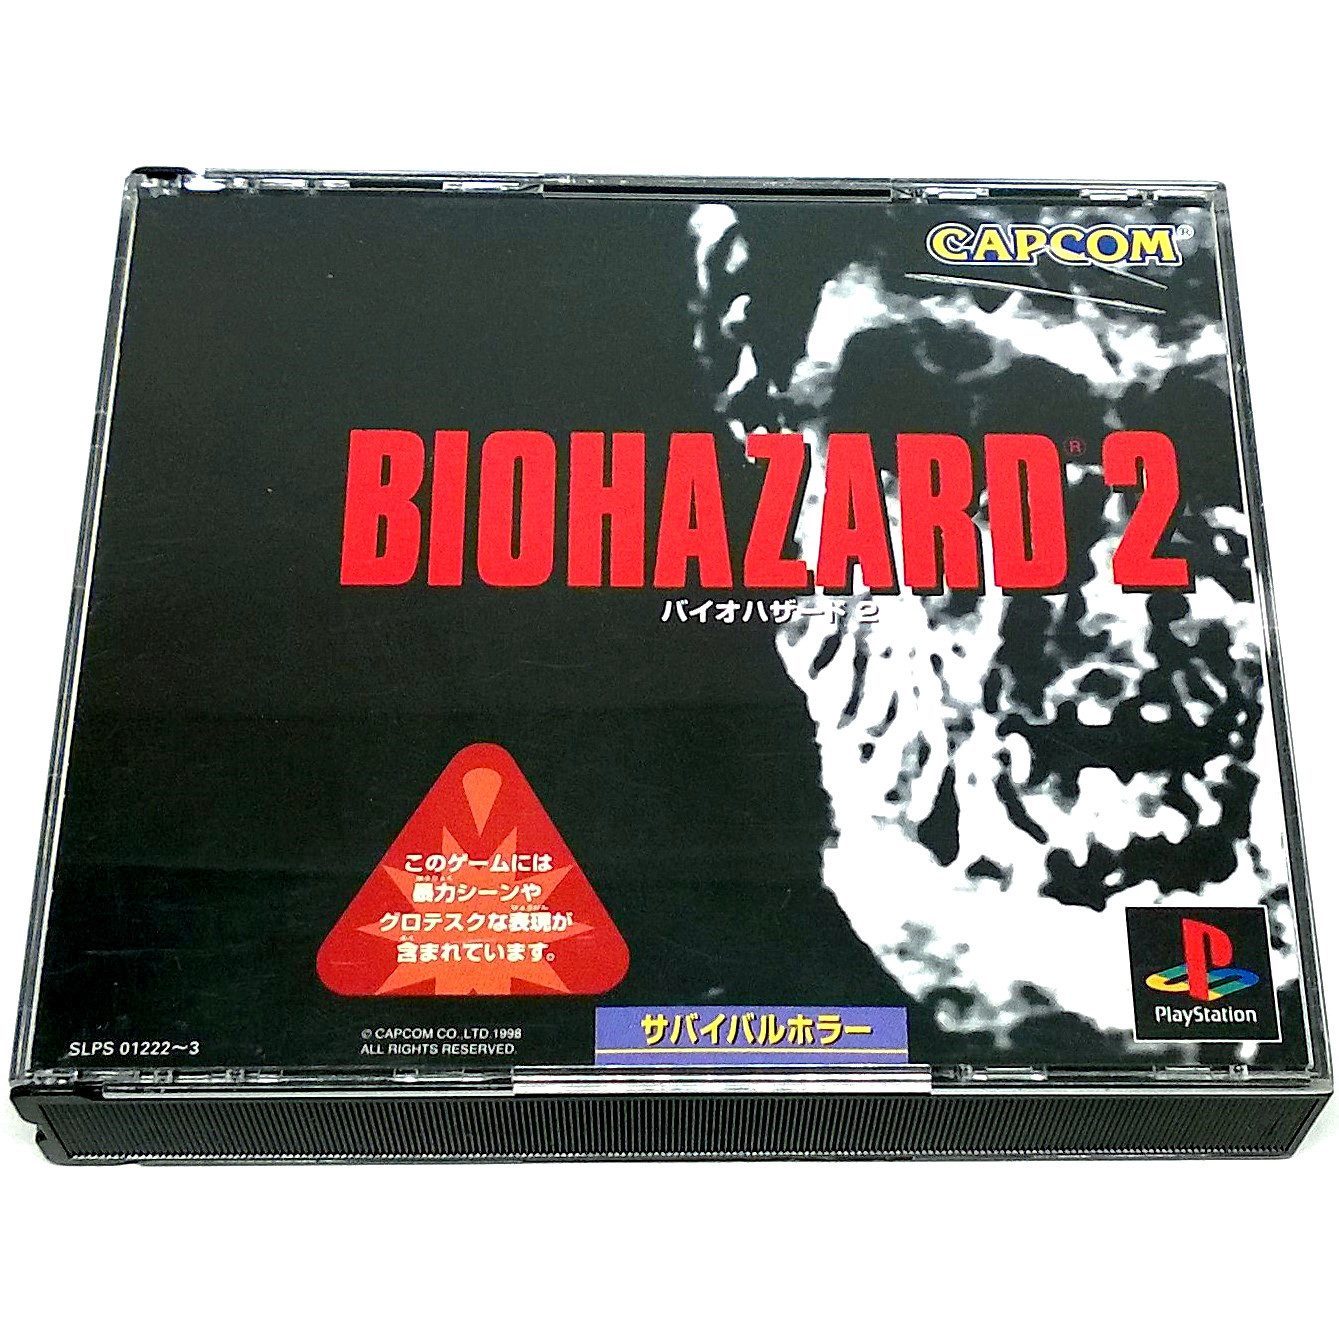 BioHazard 2 for PlayStation (import) - Front of case